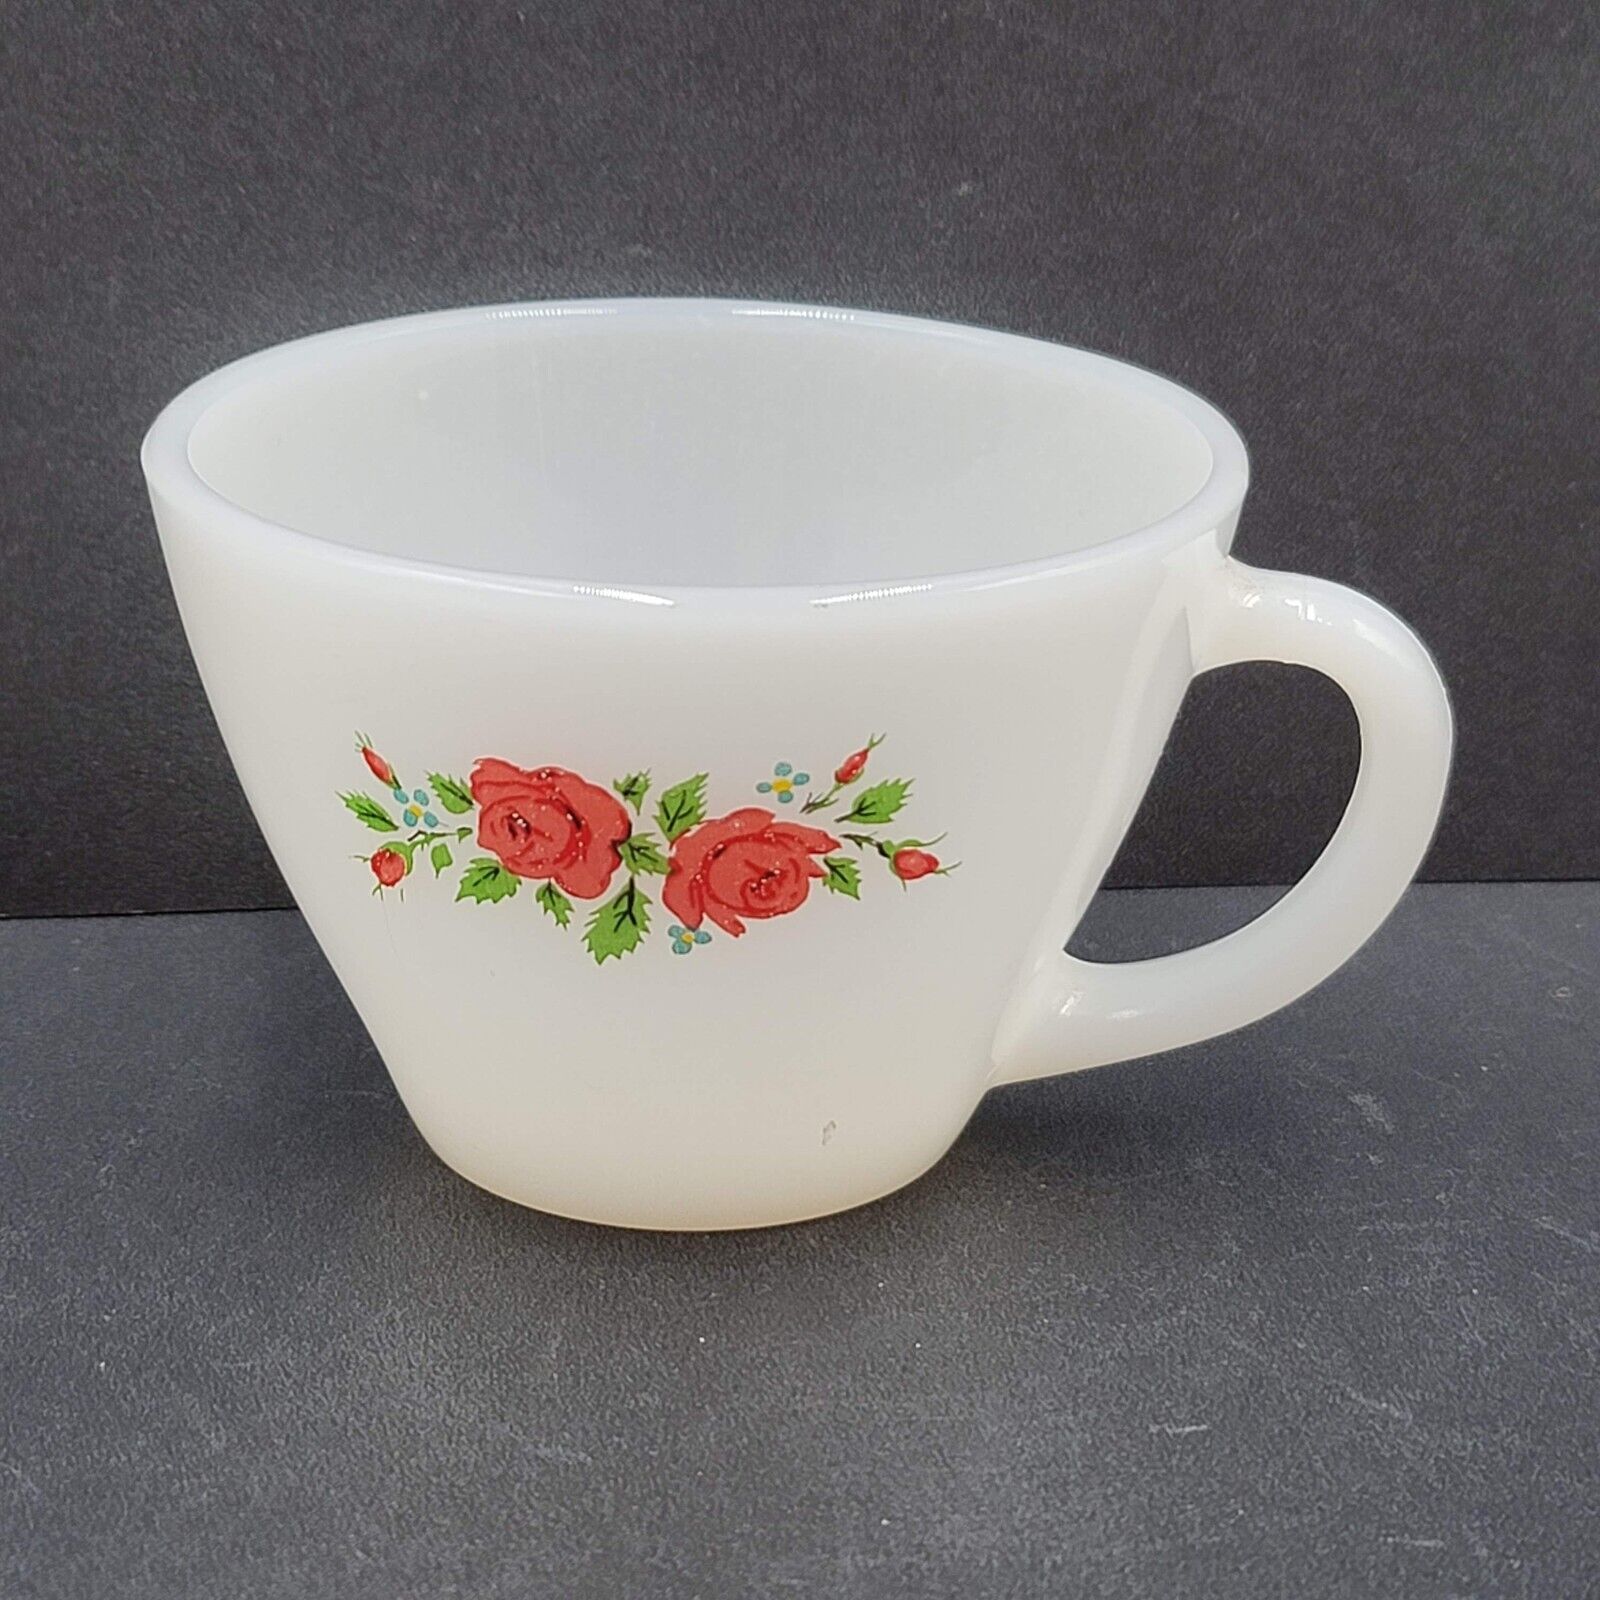 Anchor Hocking Fire King Vintage Tea Cup With Rose Pattern Milk Glass